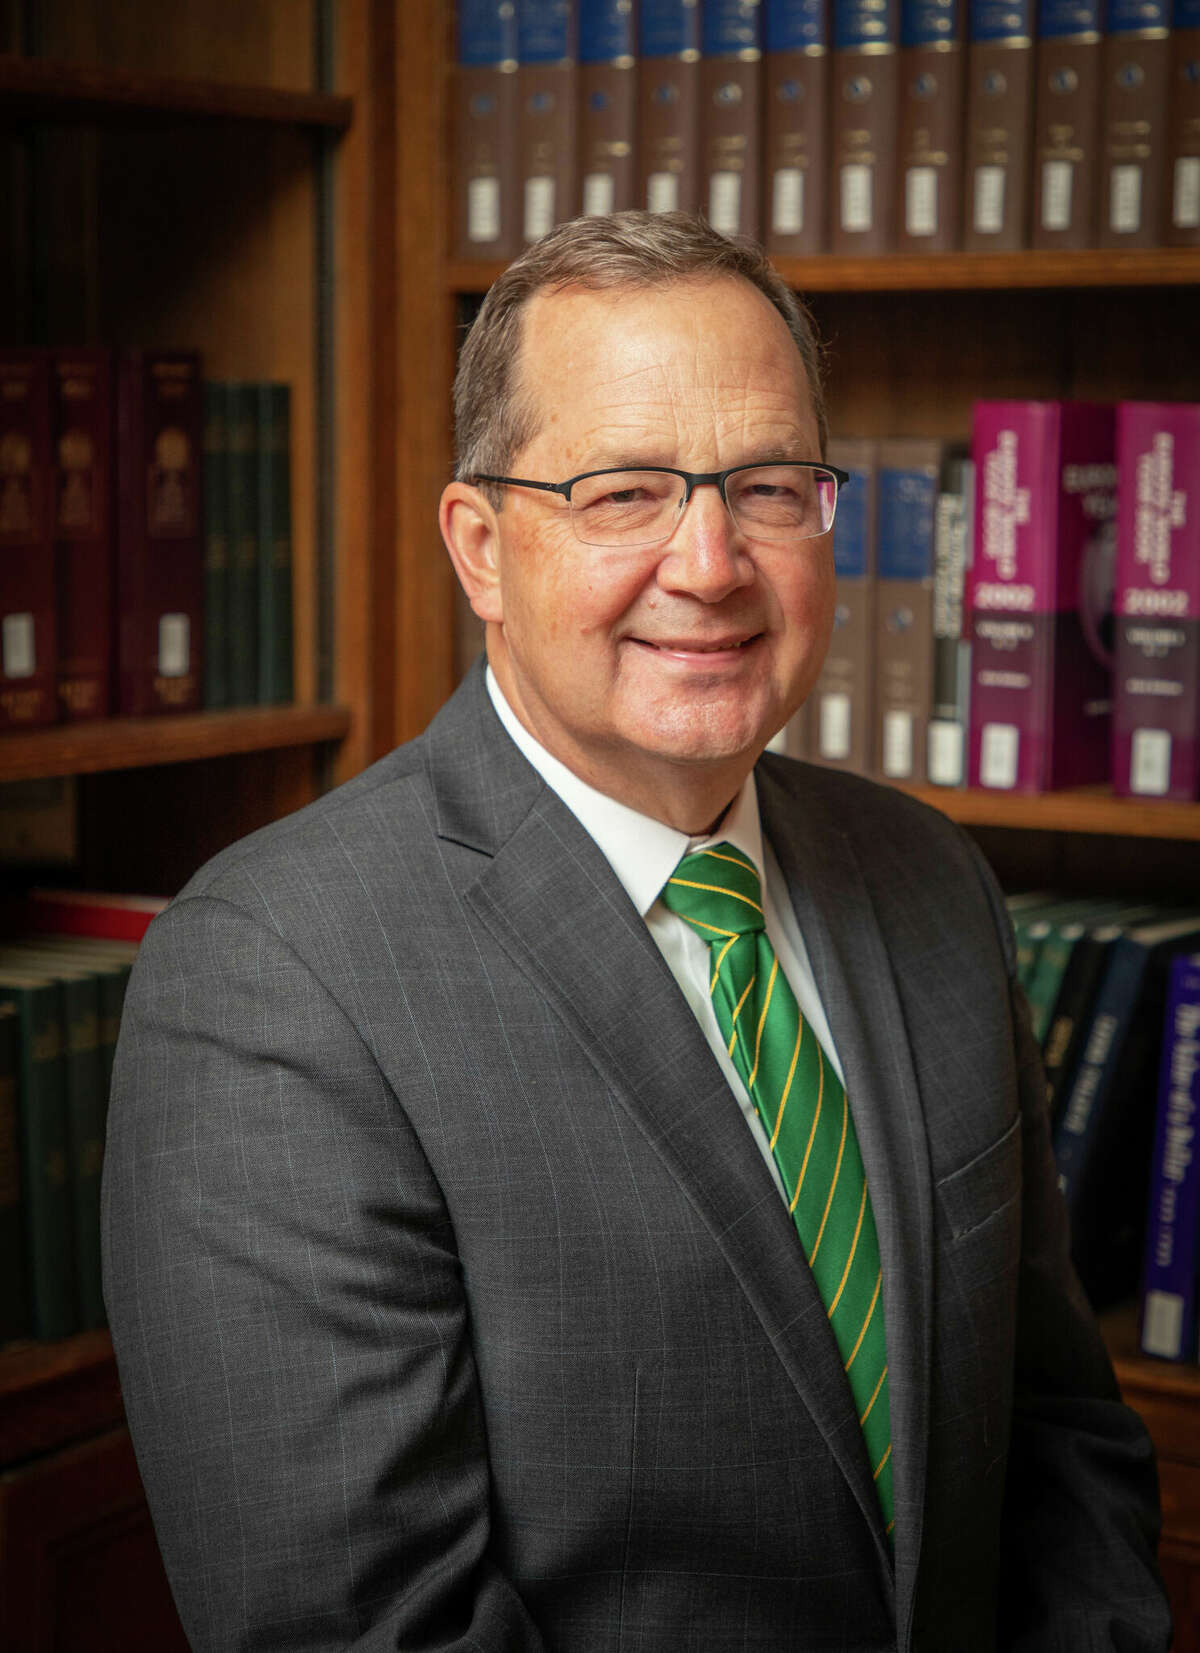 Charles “Chuck” Seifert, a business professor and the dean of the School of Business, has been named the next president of Siena College.